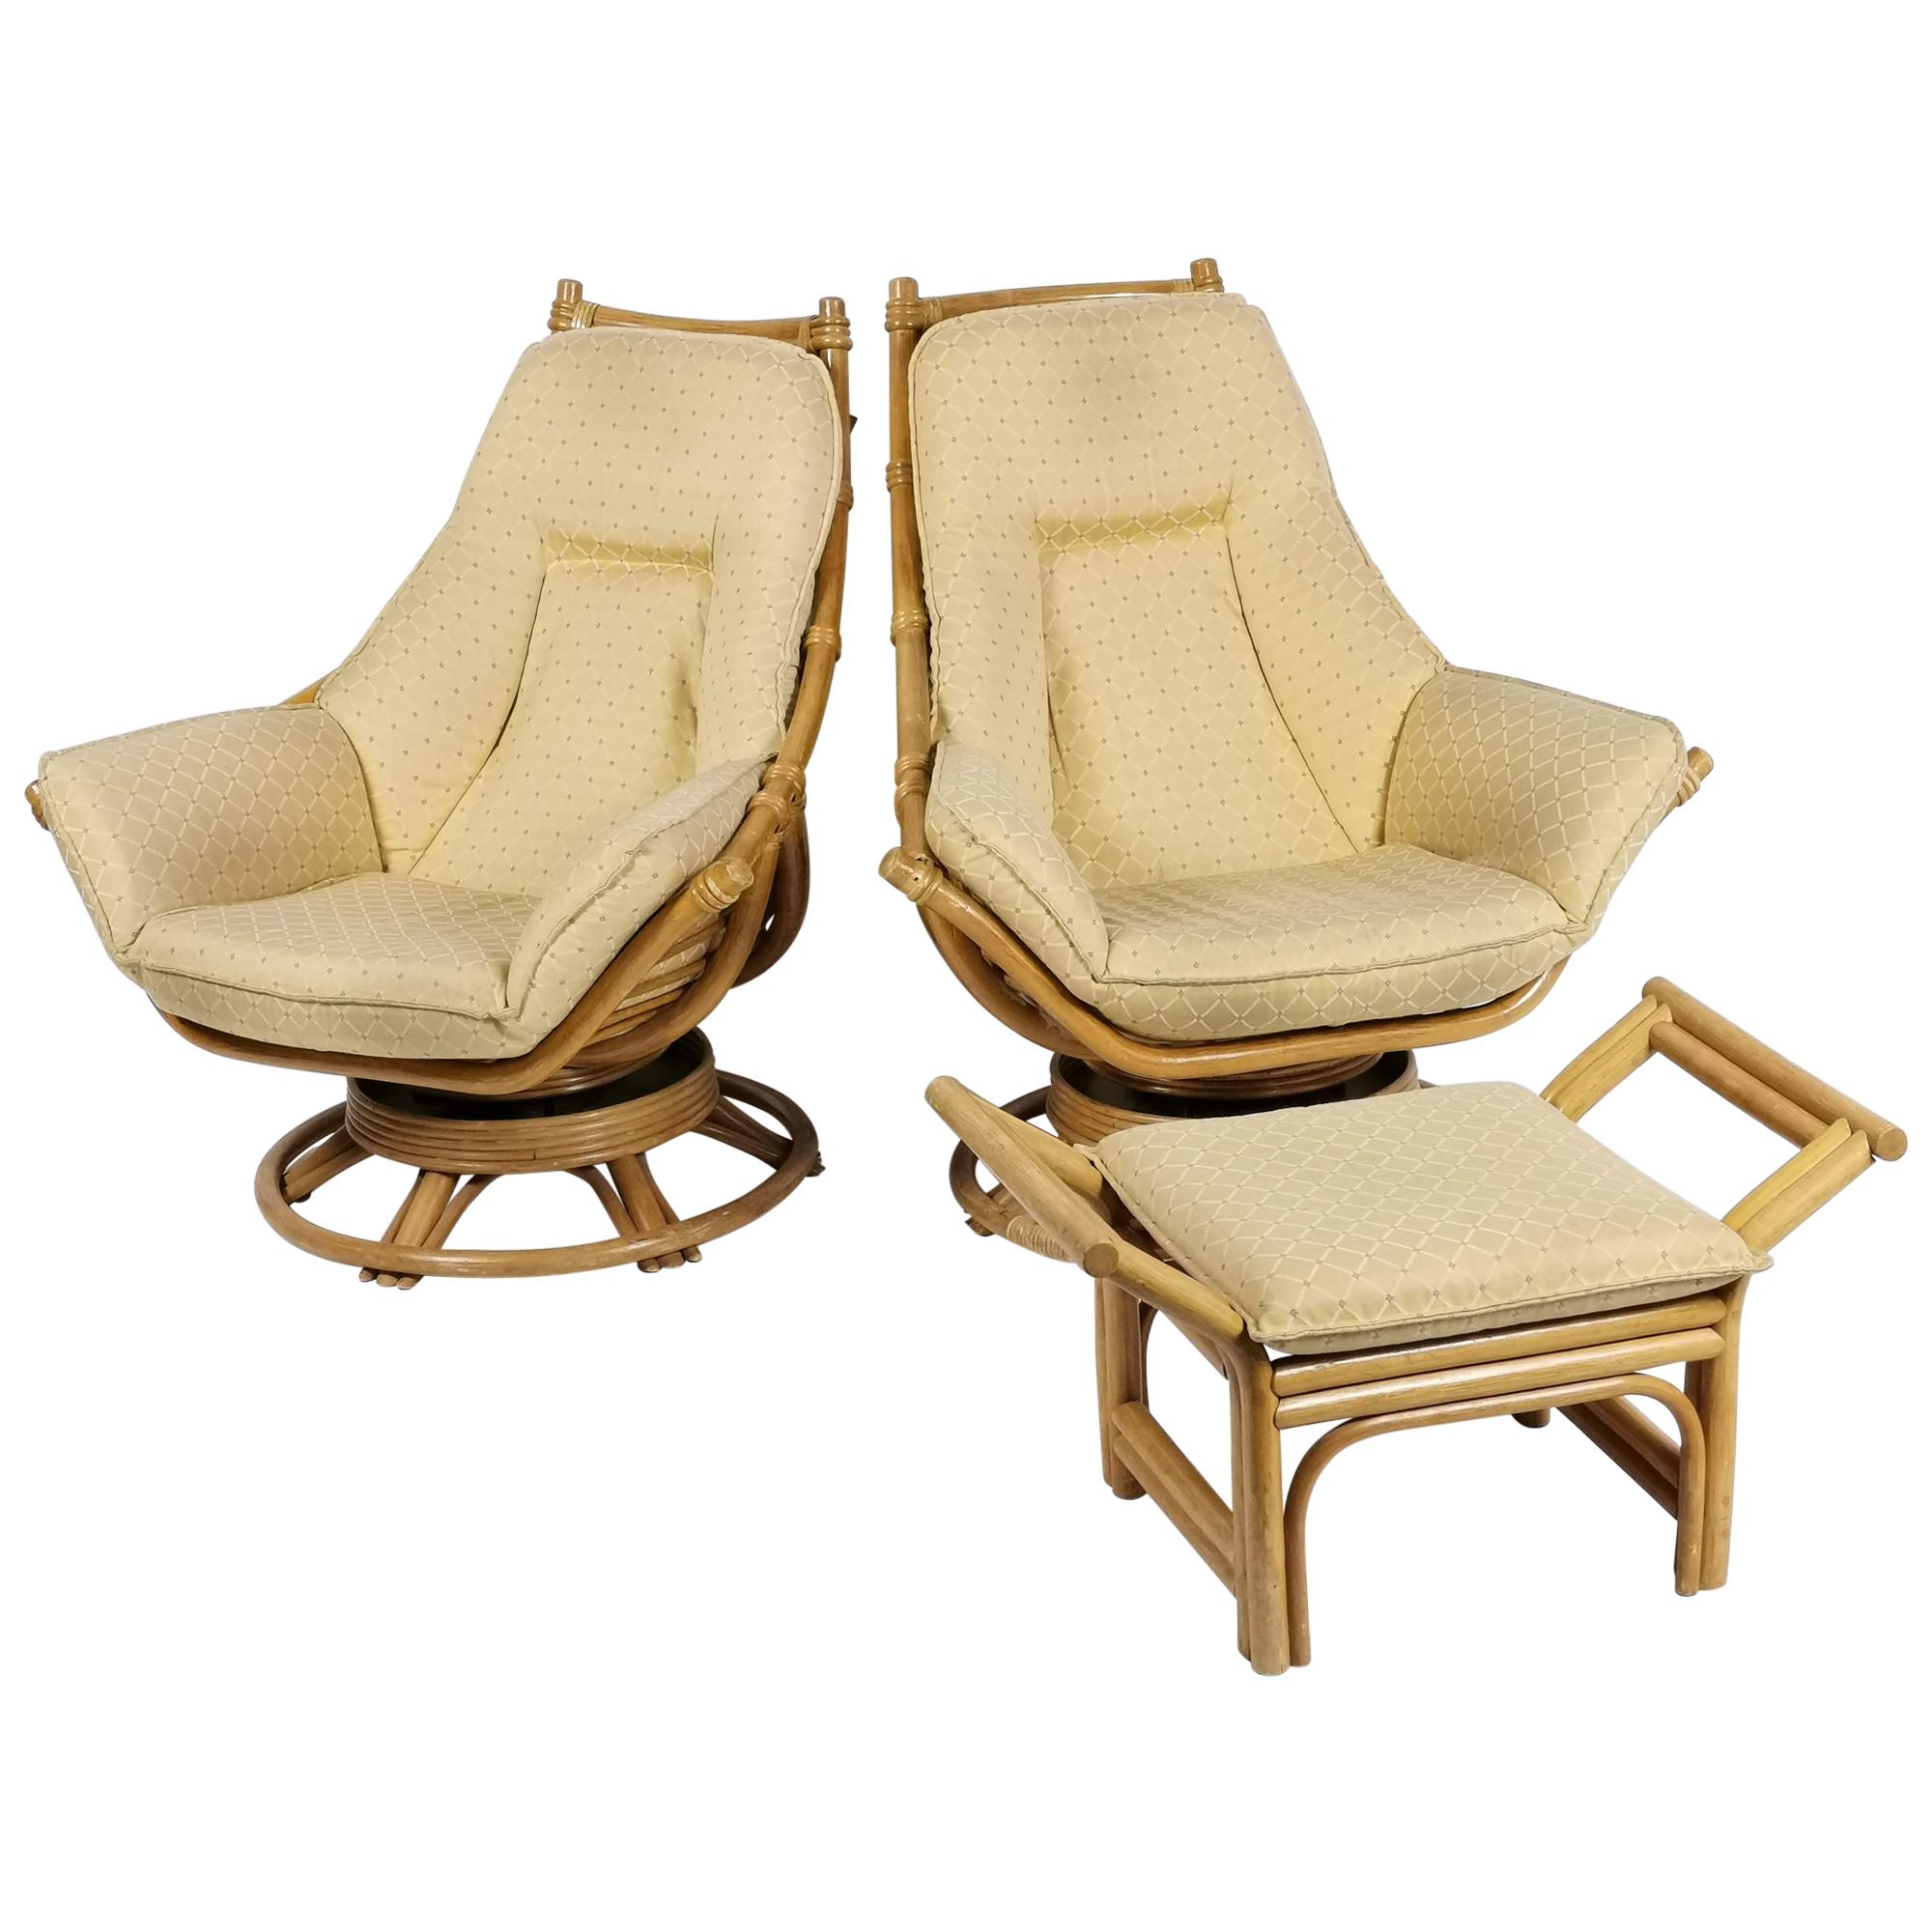 1970s Pair of Rattan Rocking and Swivel Lounge Chair with Ottoman , USA